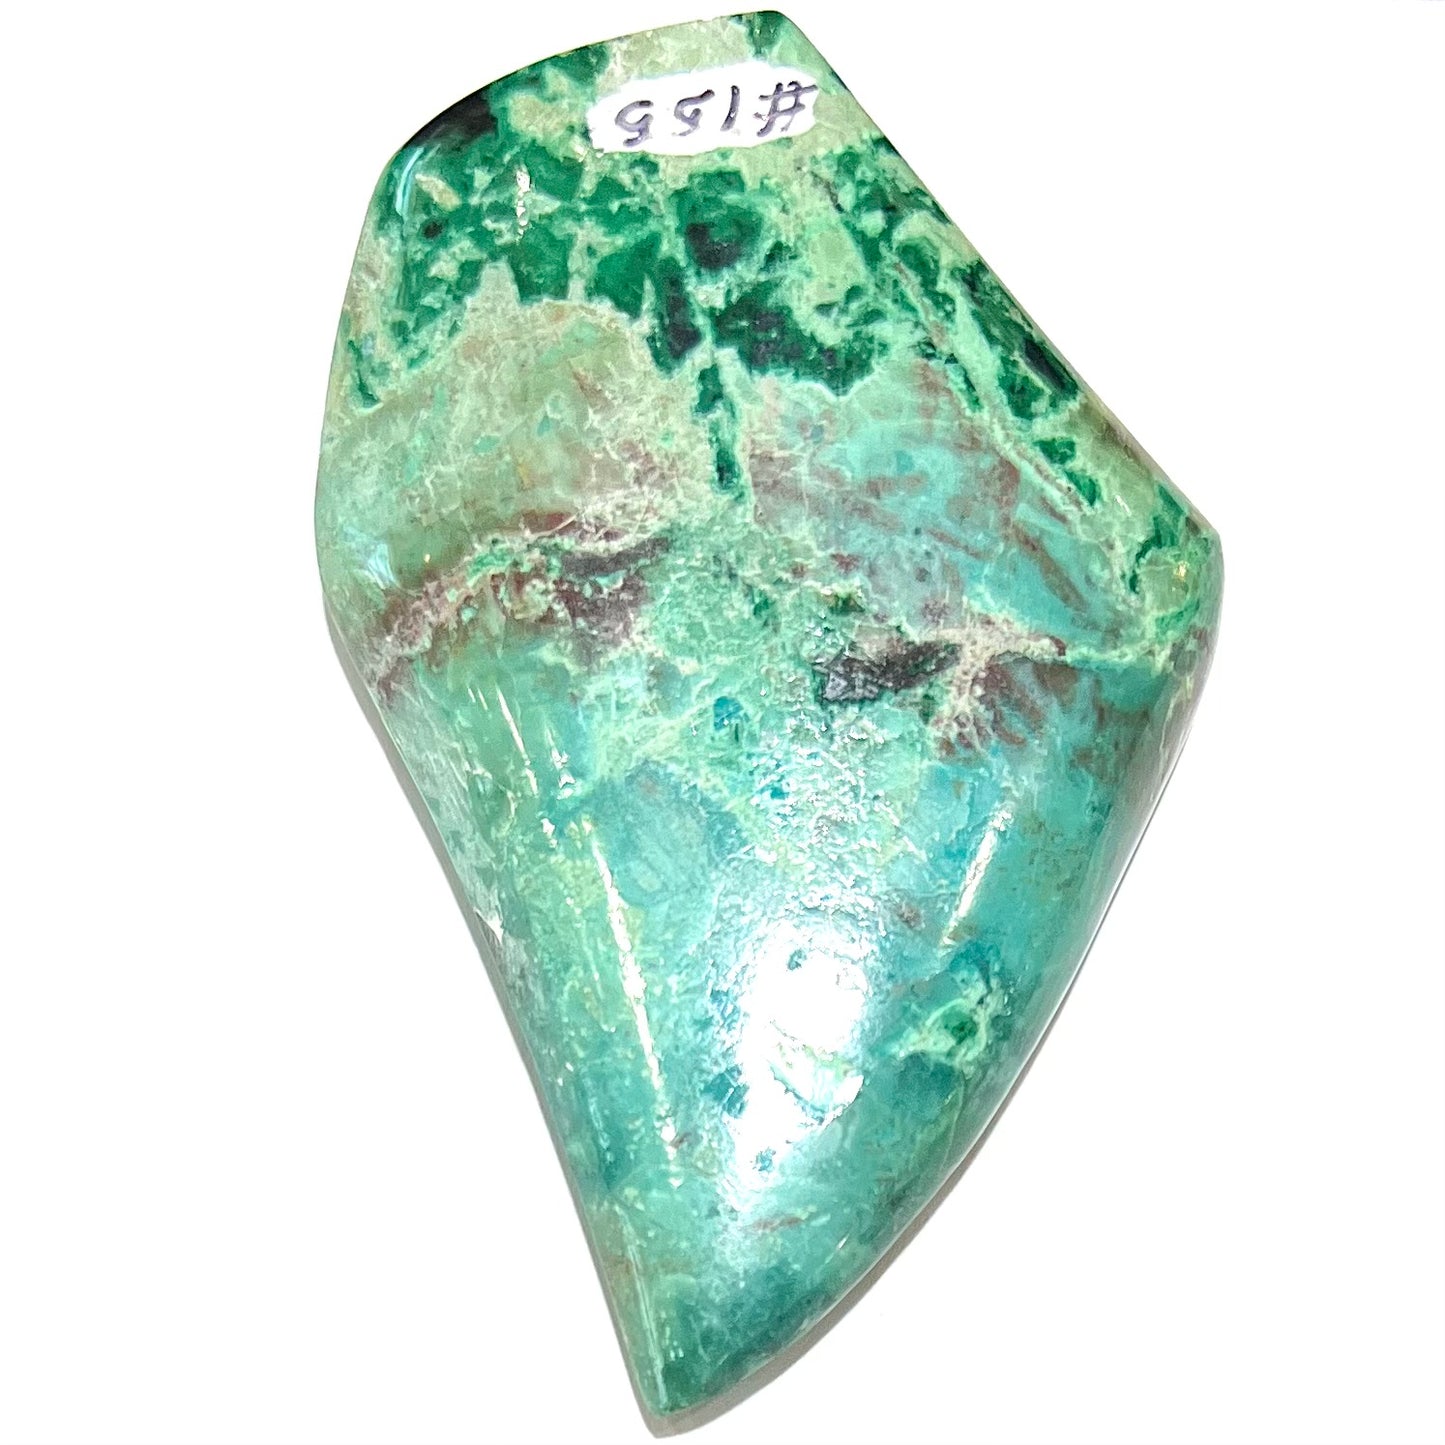 A polished, freeform shaped Eilat stone from King Solomon's Mine, Israel.